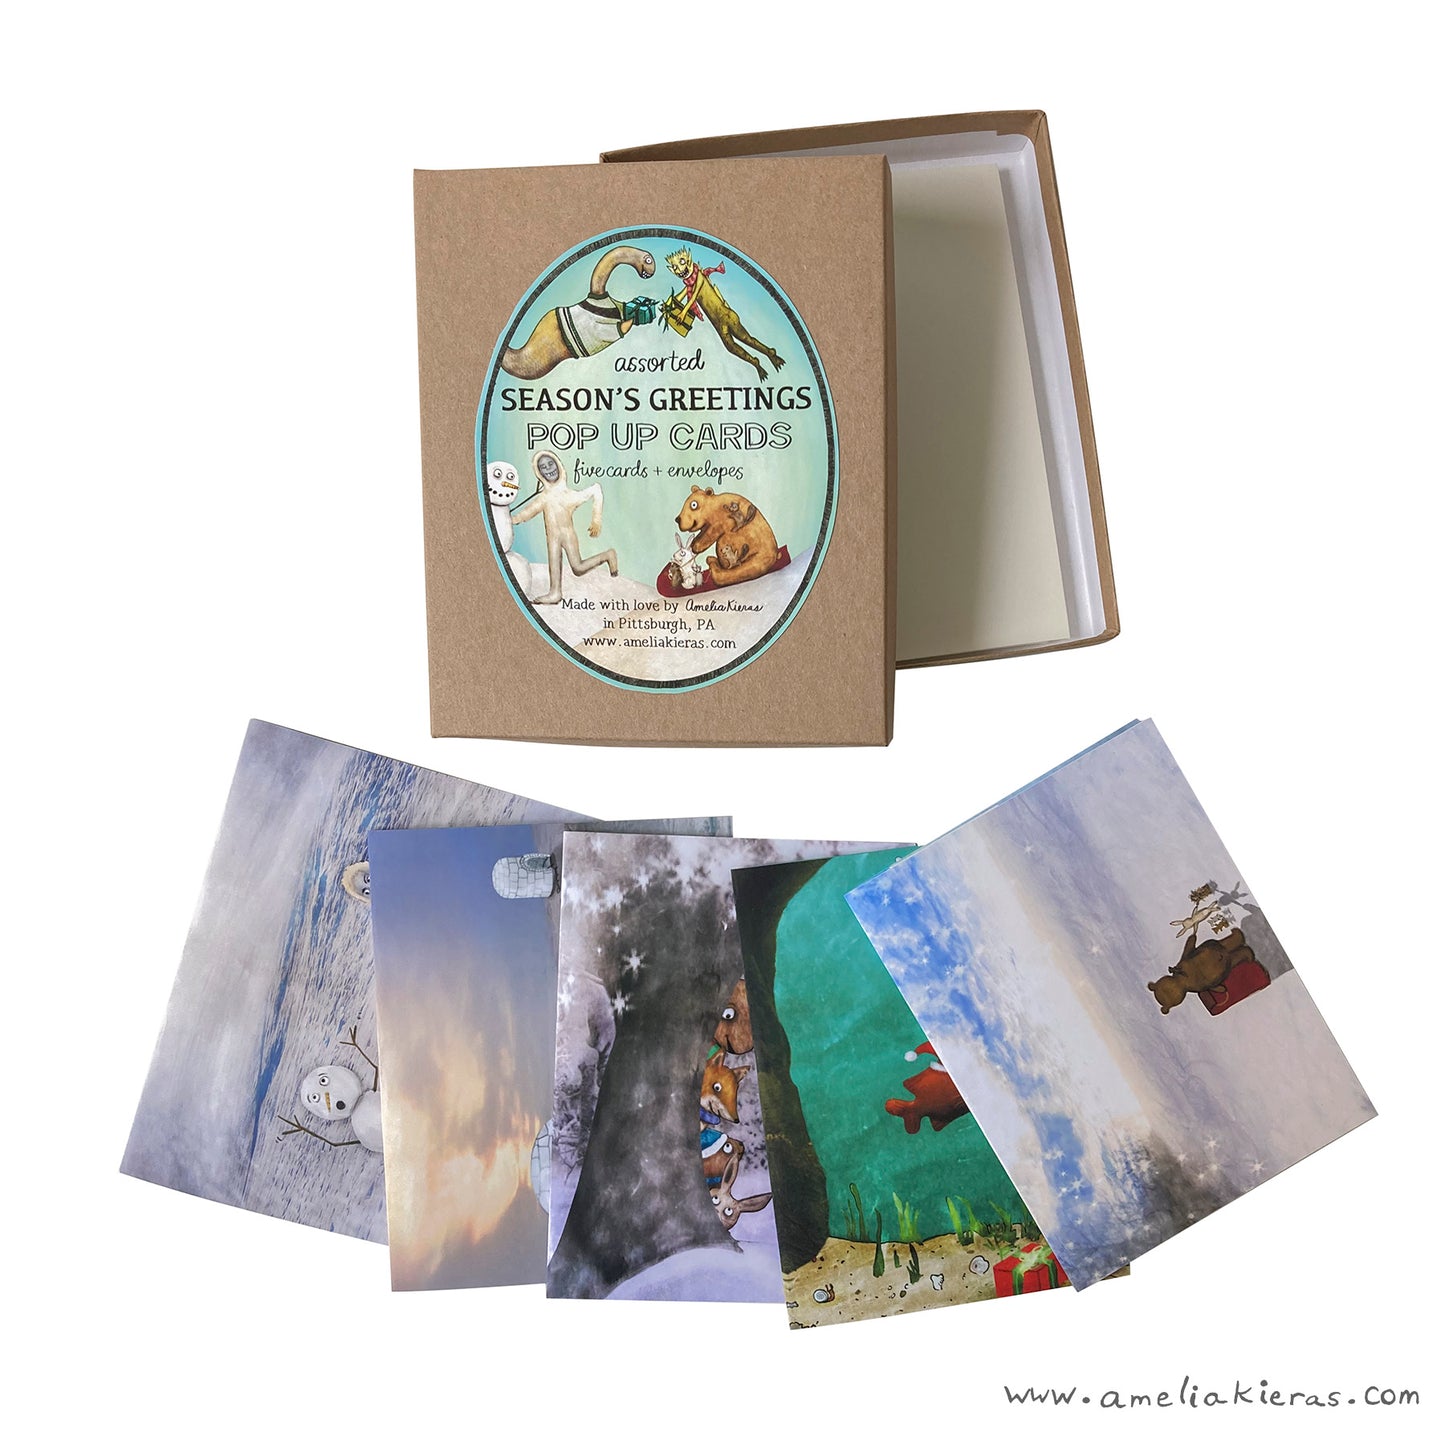 Season's Greetings Pop Up Card Box Set - Set of Five Assorted Pop Up Cards